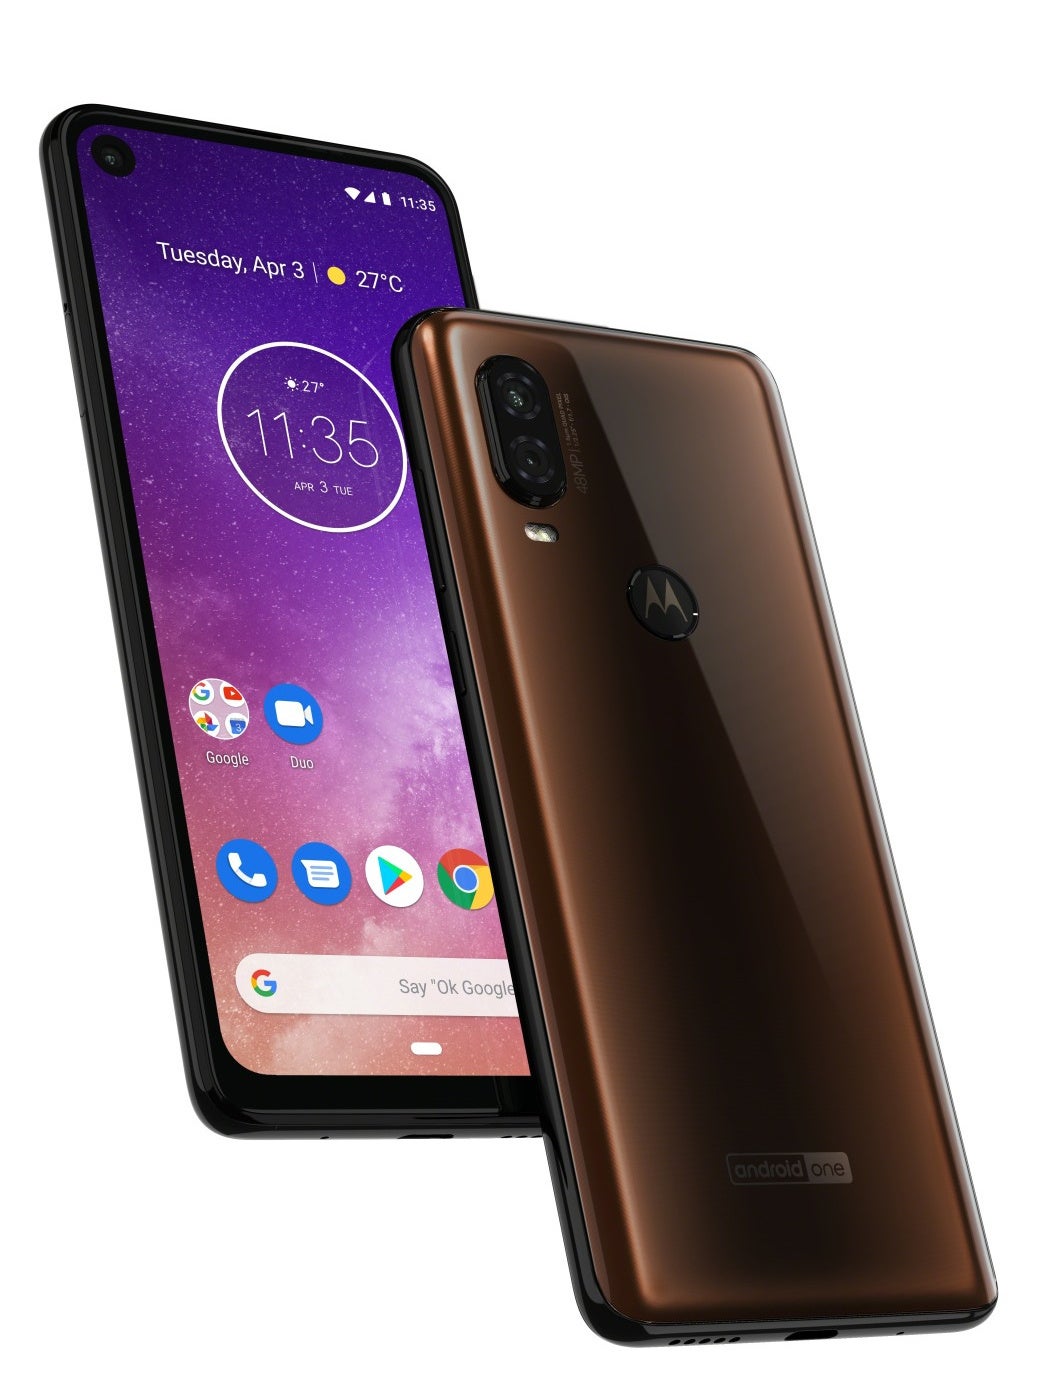 Motorola One Vision comes with cinema-like 21:9 display, 48MP camera and an Exynos processor